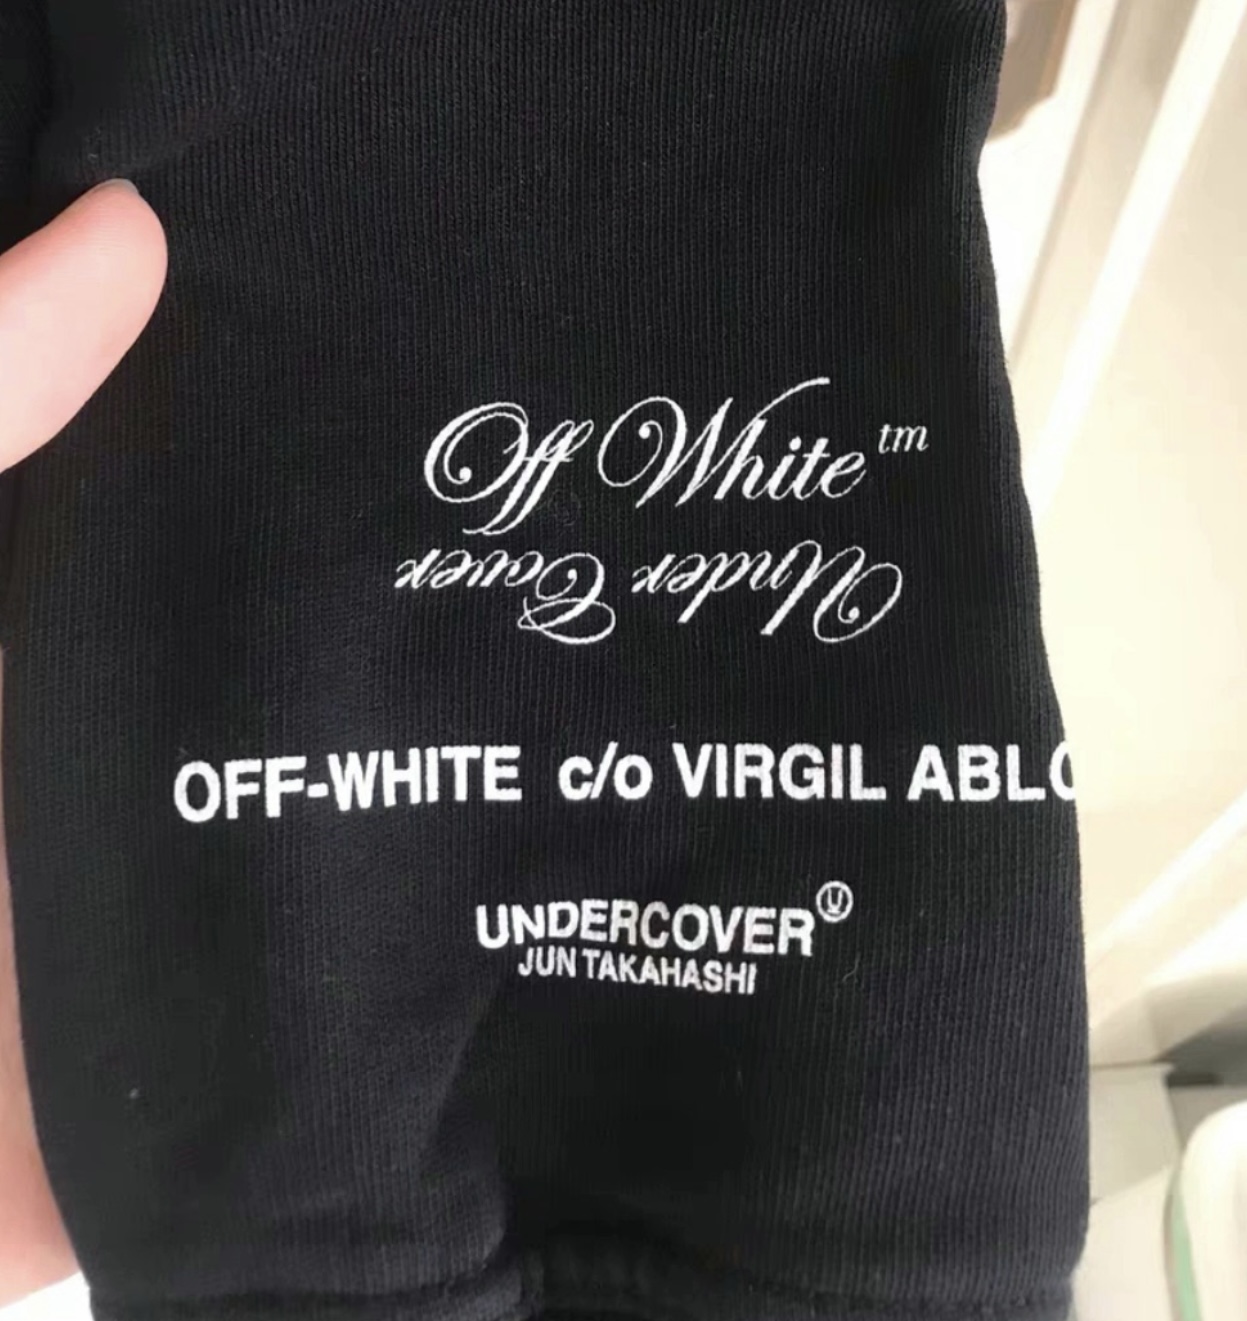 Undercover x Off-white hoodie - 5